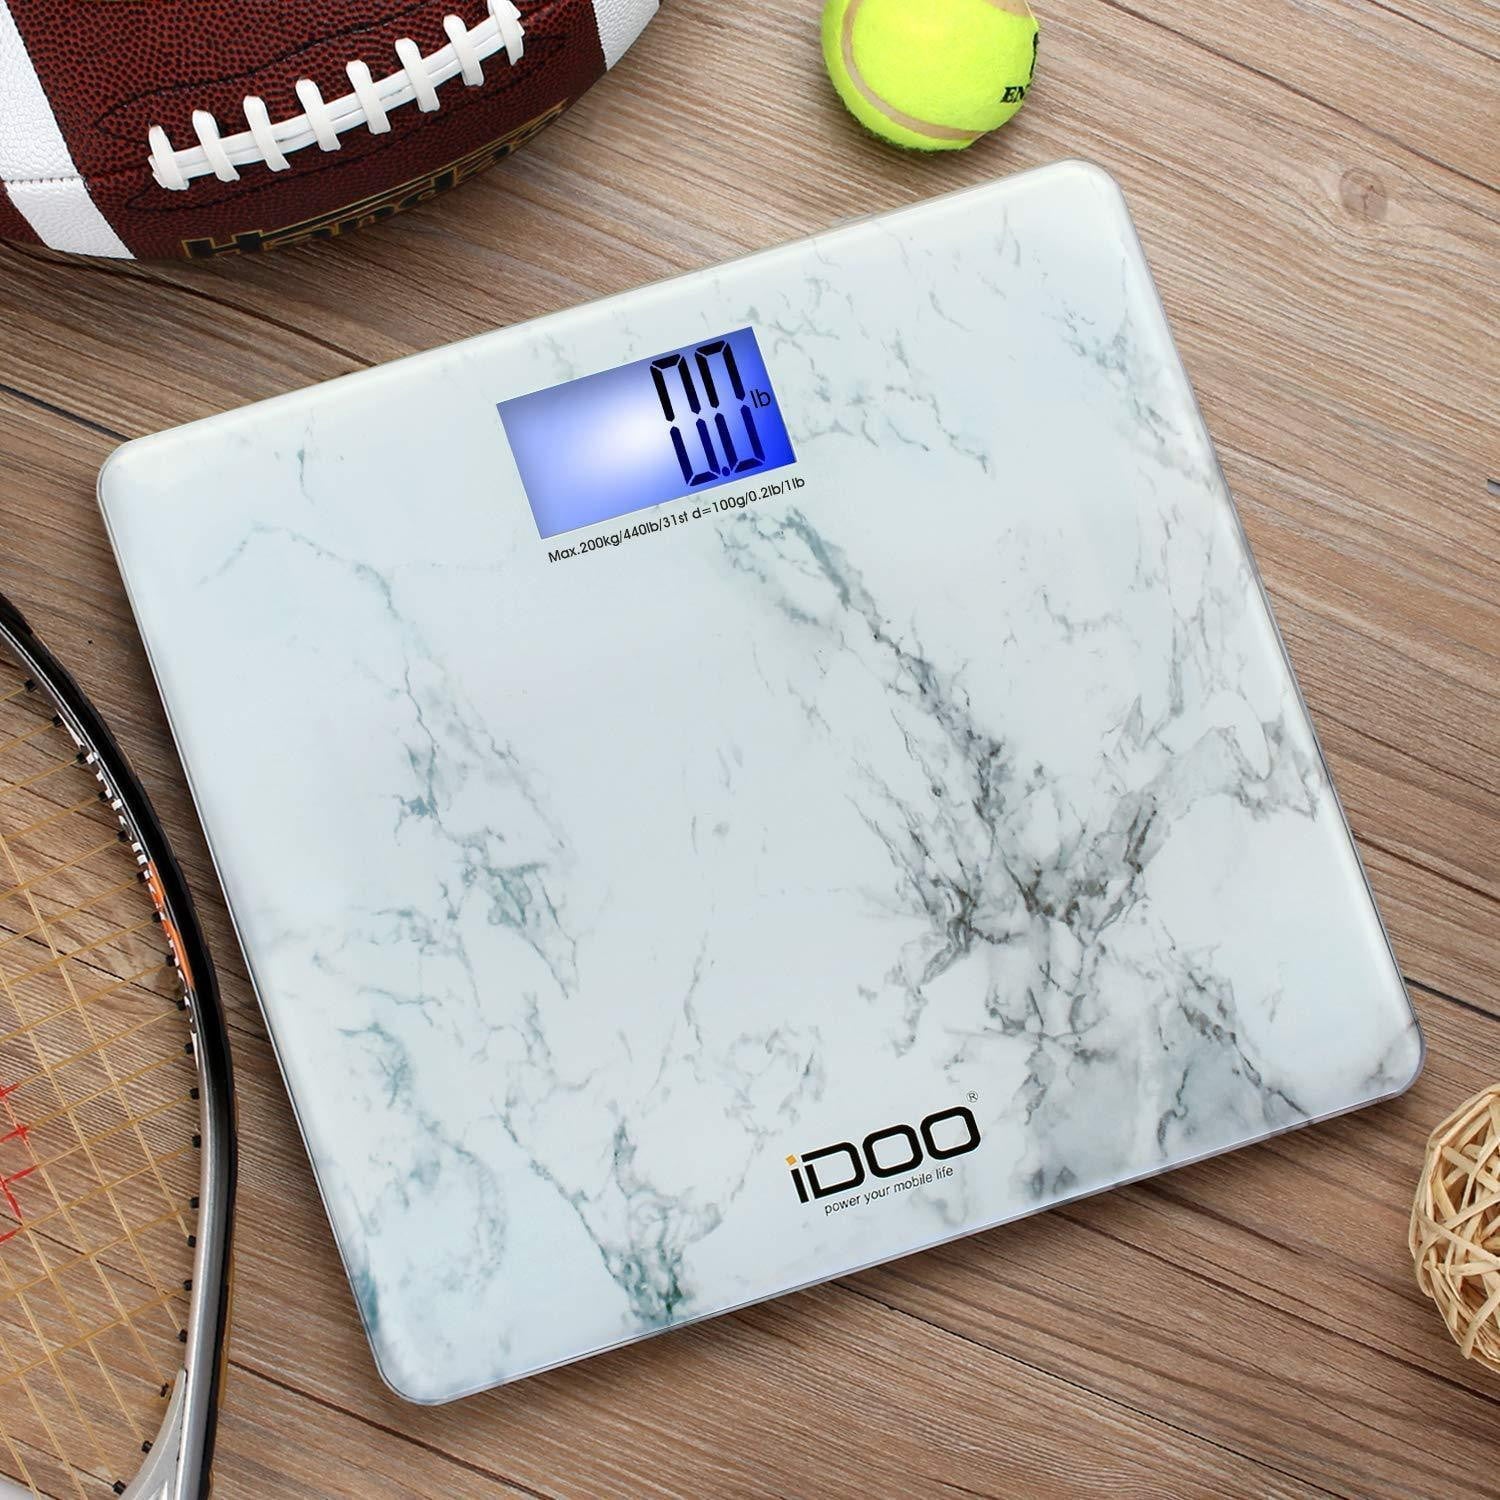 Digital Body Weight Scale Bathroom Weighing Scale for People with